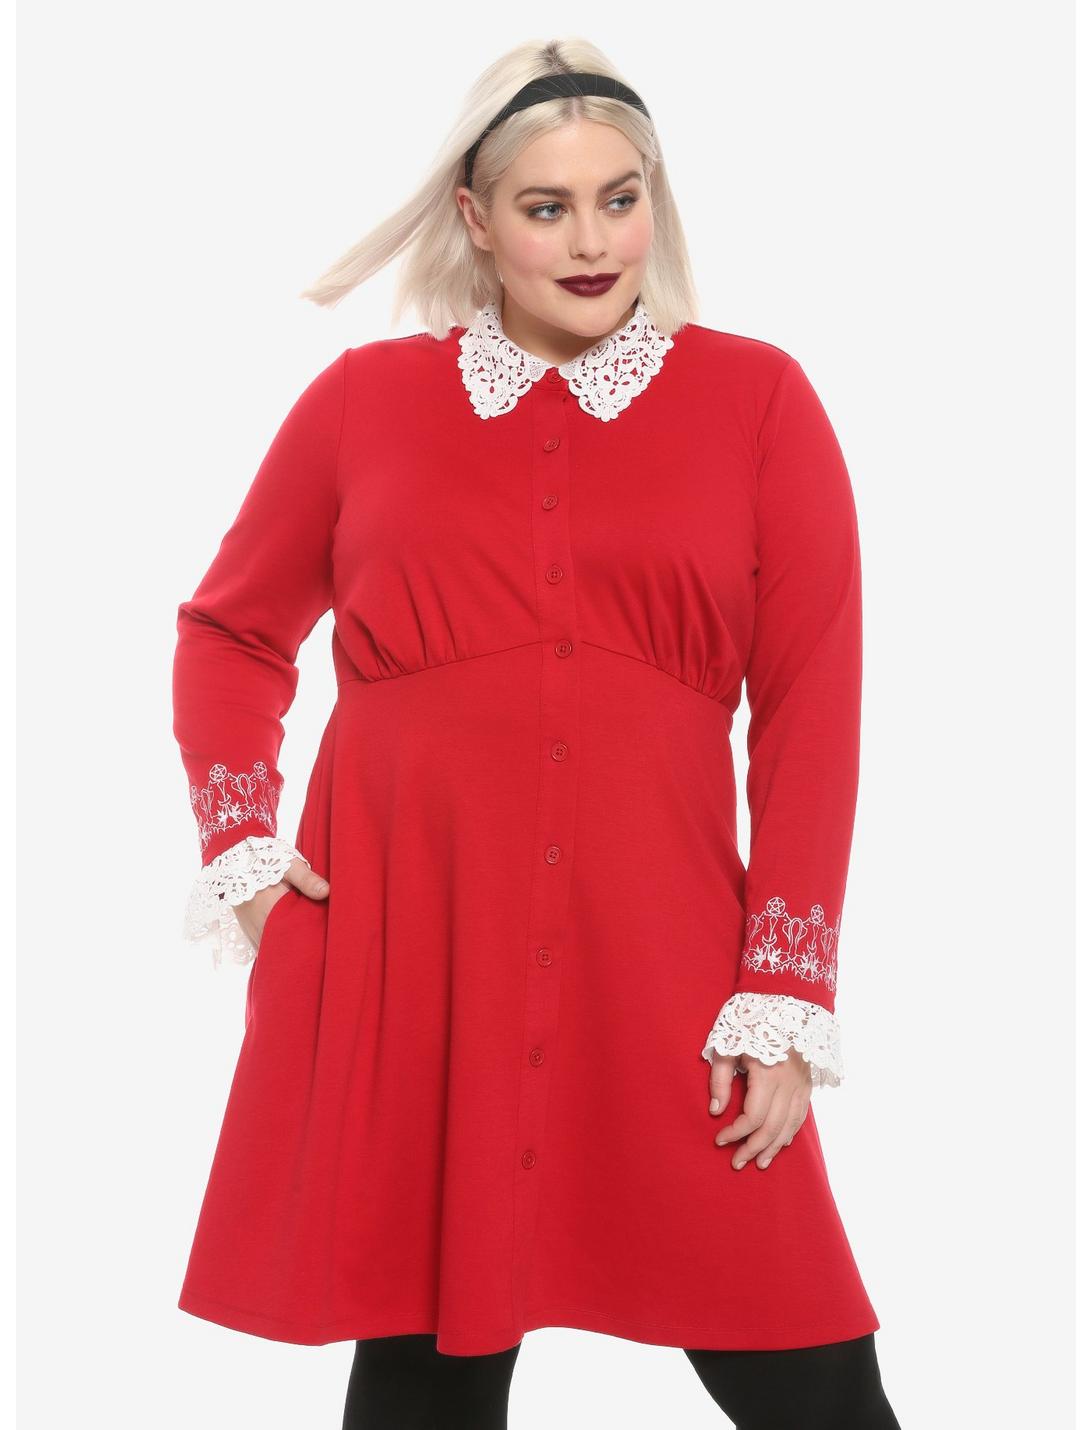 Chilling Adventures Of Sabrina Lace Collar Button-Front Dress Plus Size, RED, hi-res